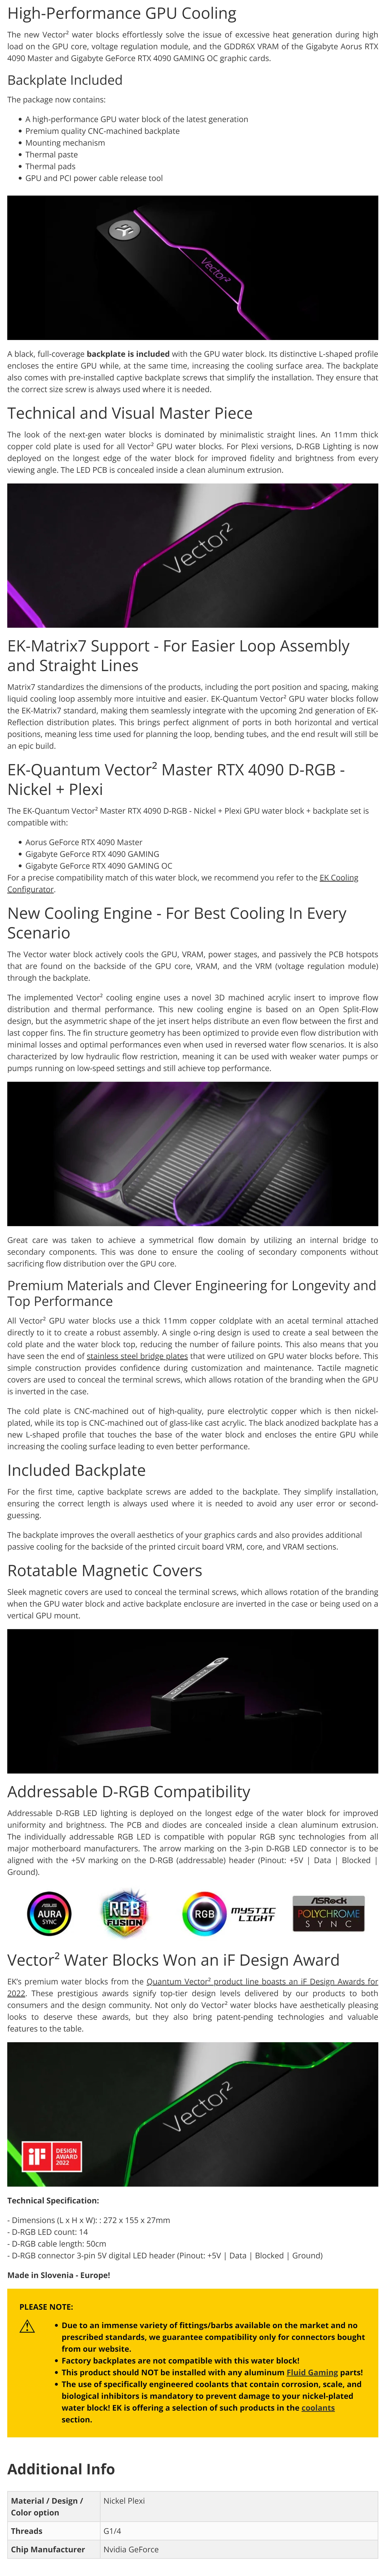 A large marketing image providing additional information about the product EK Quantum Vector2 Master RTX 4090 D-RGB GPU Waterblock - Nickel + Plexi - Additional alt info not provided